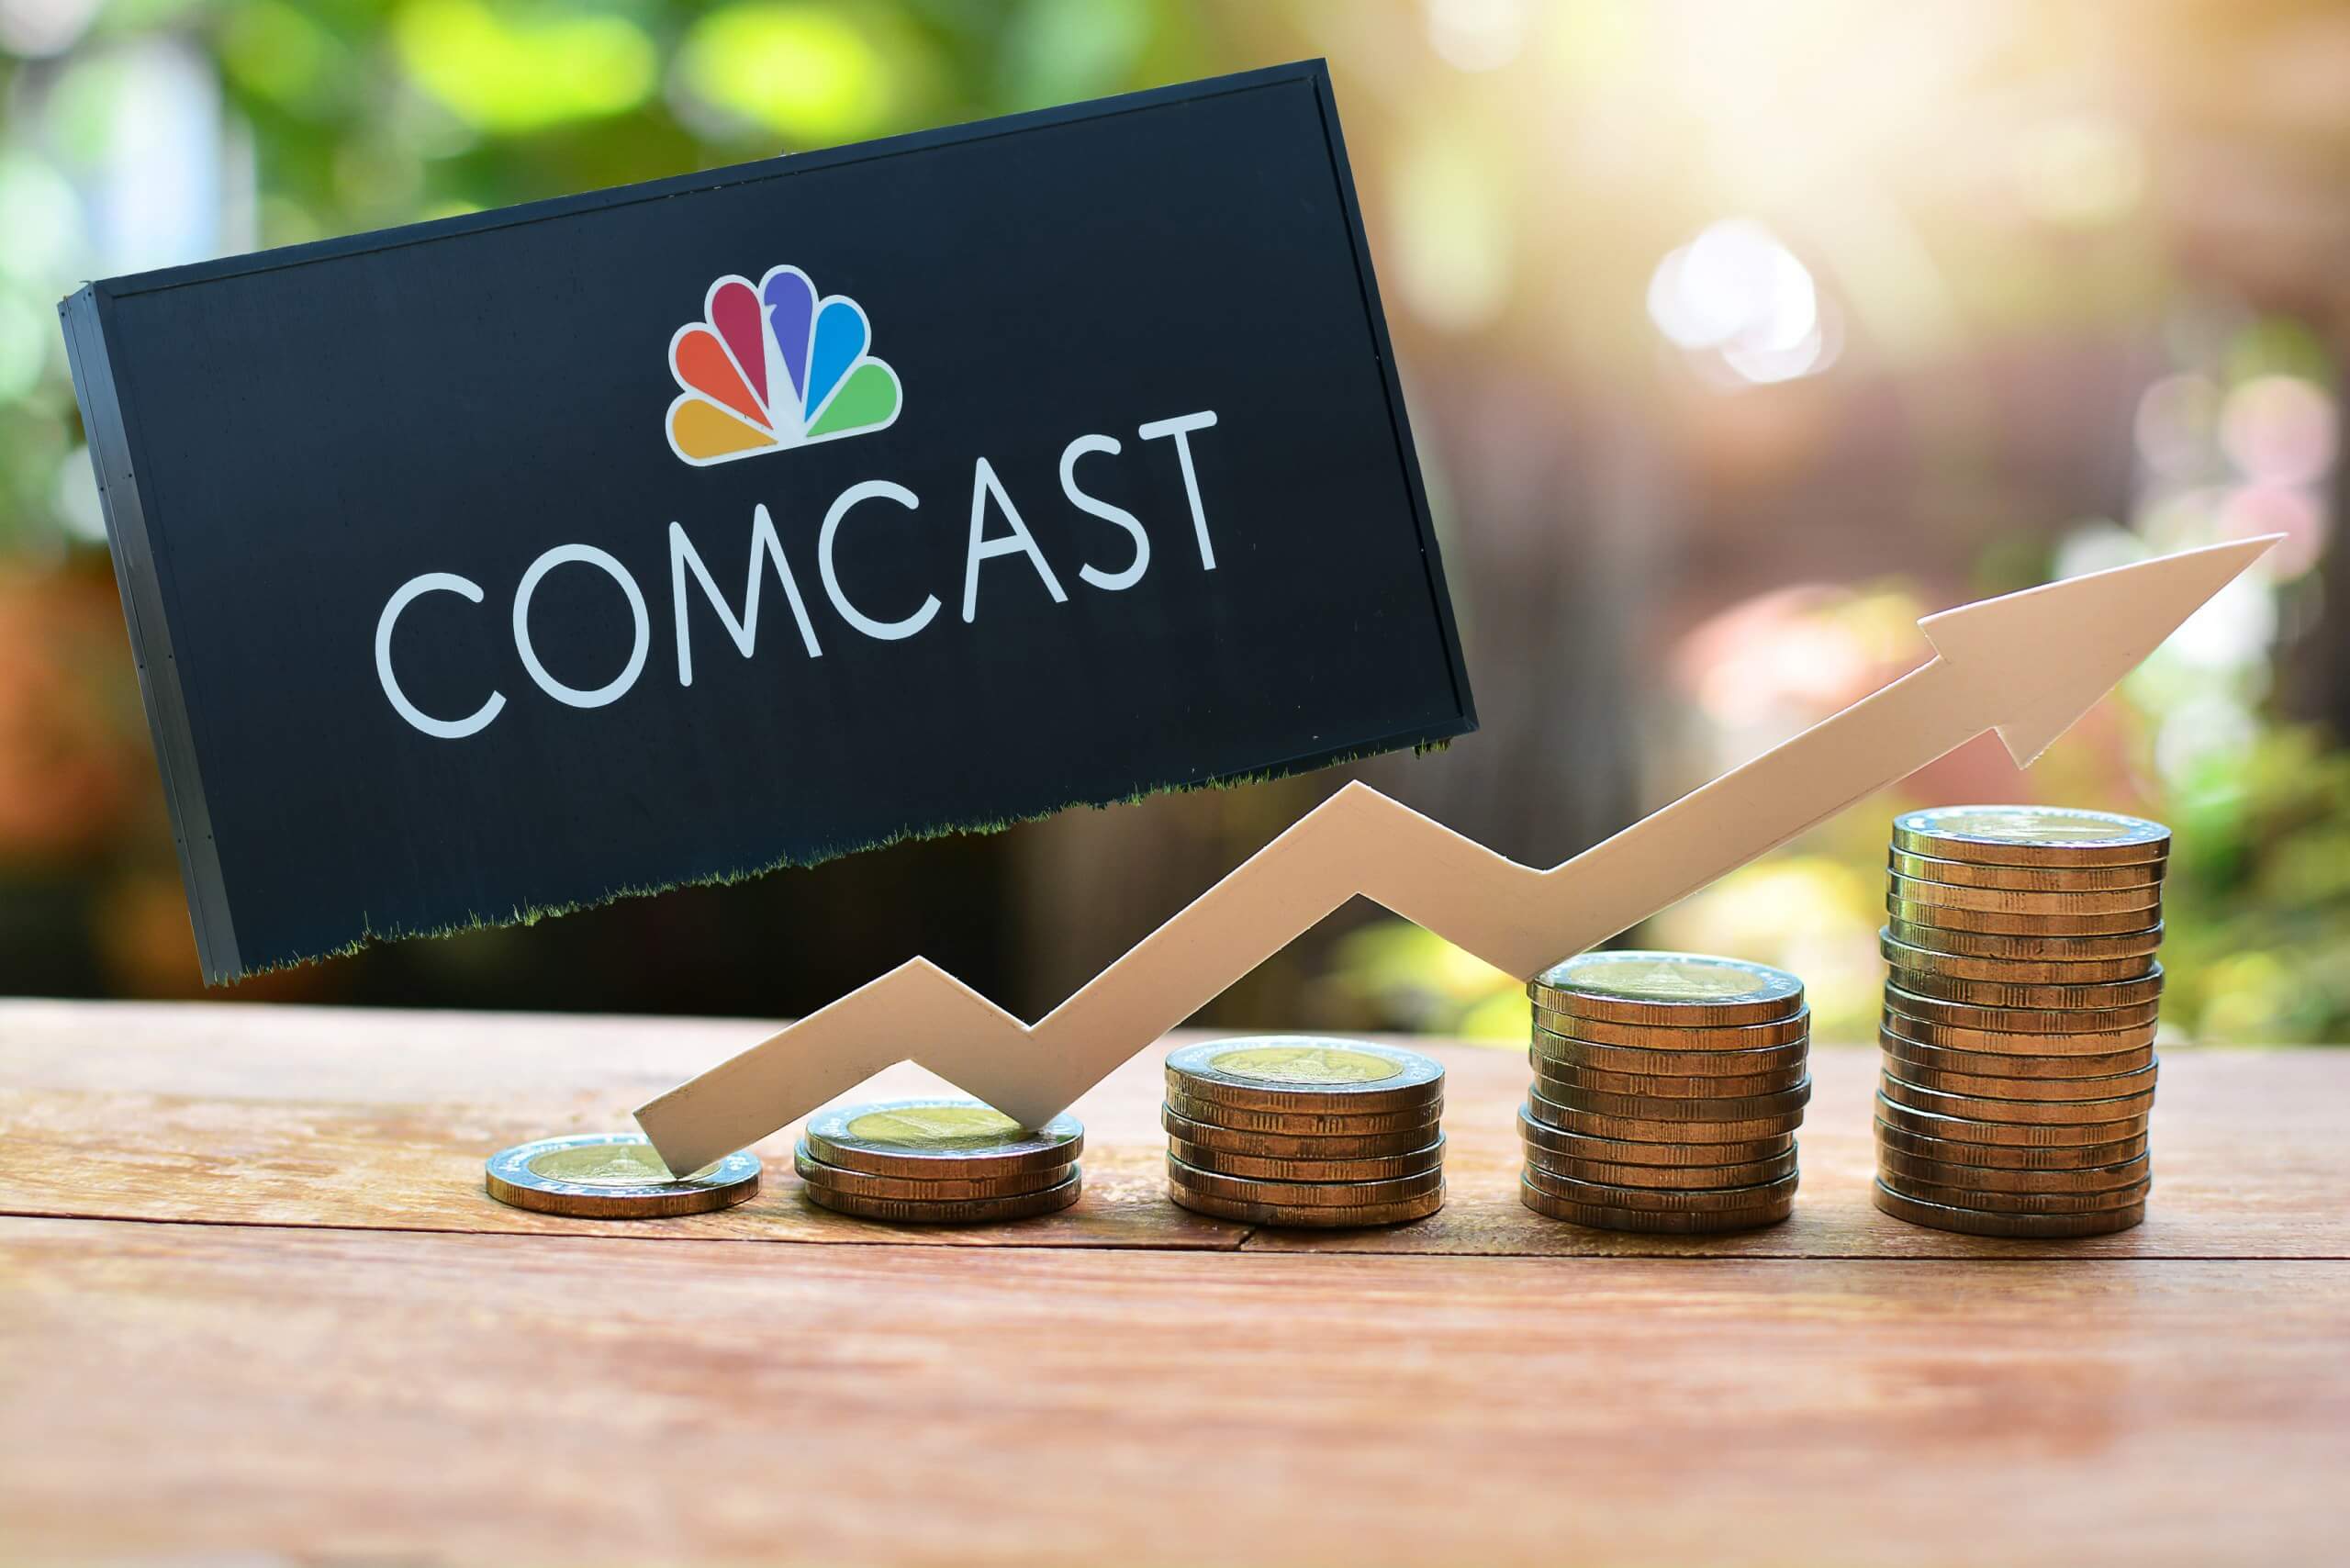 Comcast set to raise fees again in January by 21 percent